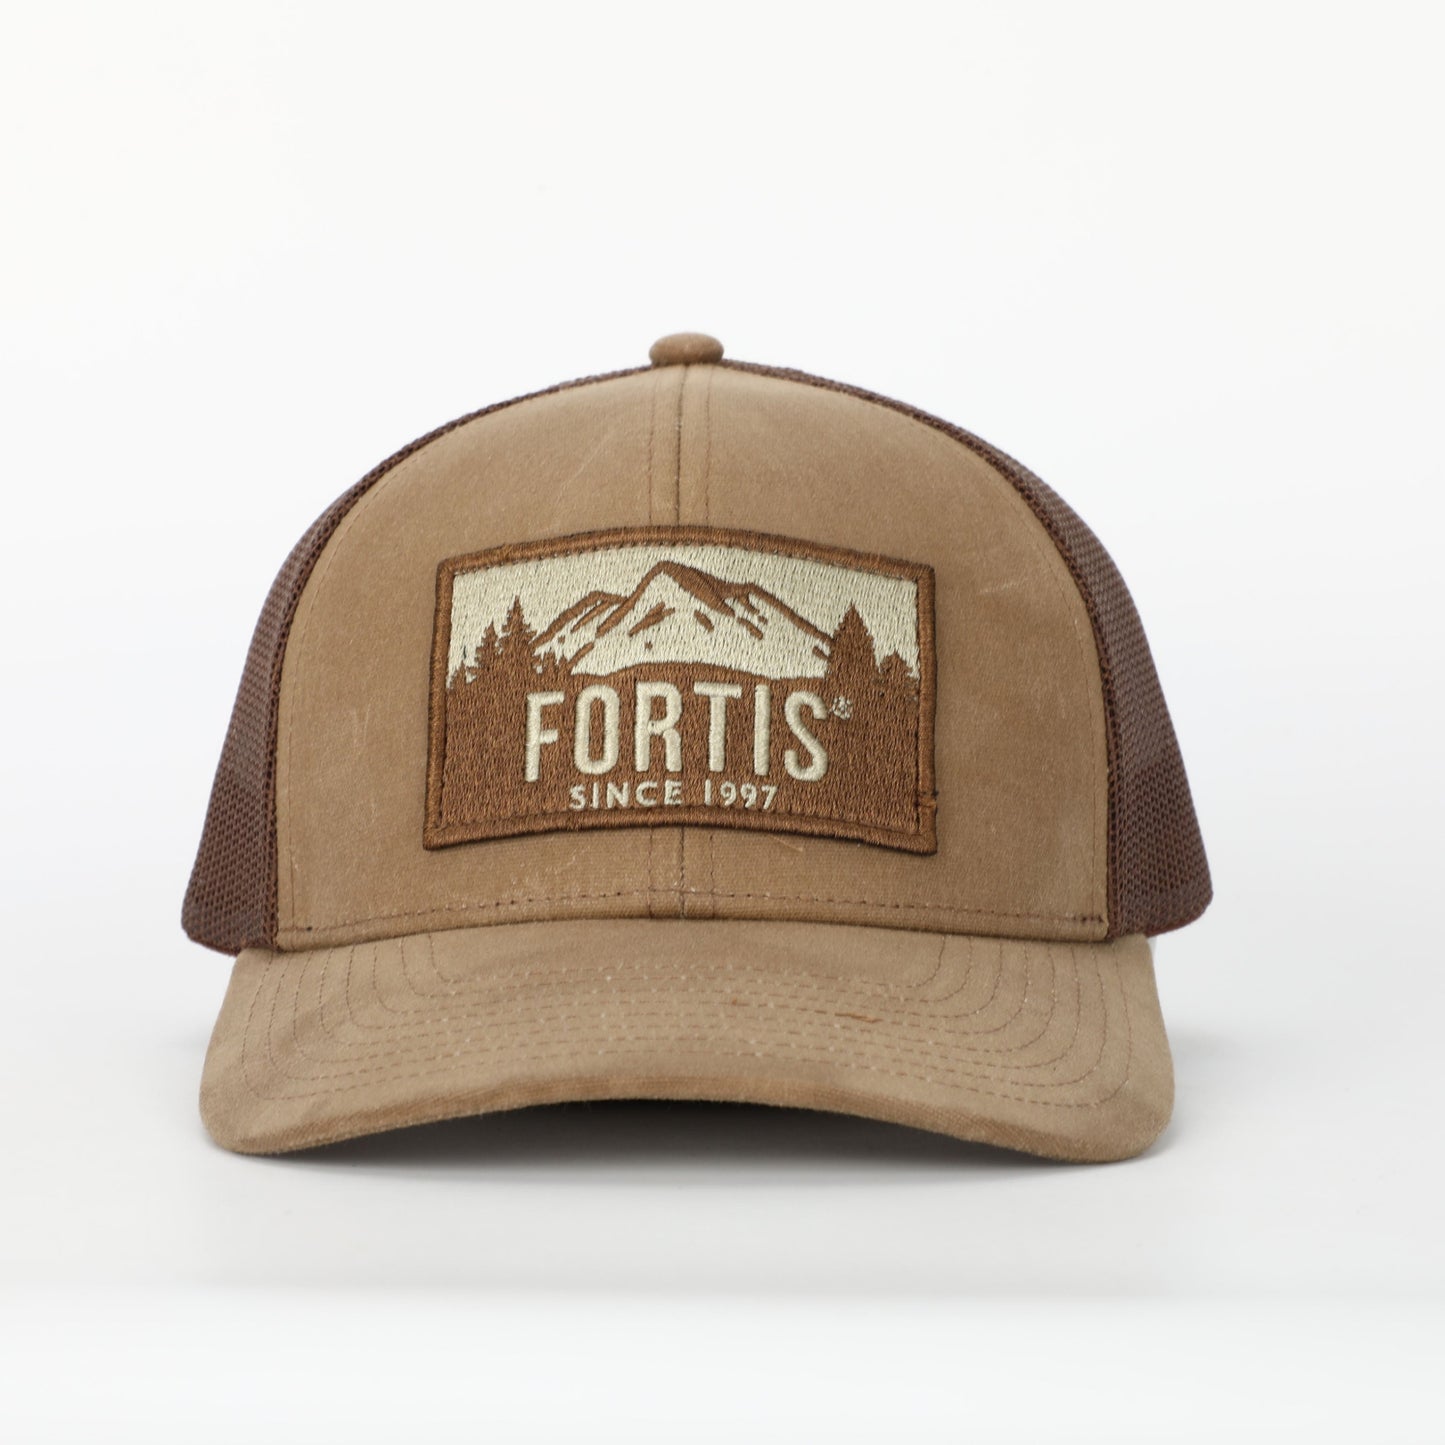 Fortis Clothing UK unisex "Wax Truckers Caps" MADE IN THE UK